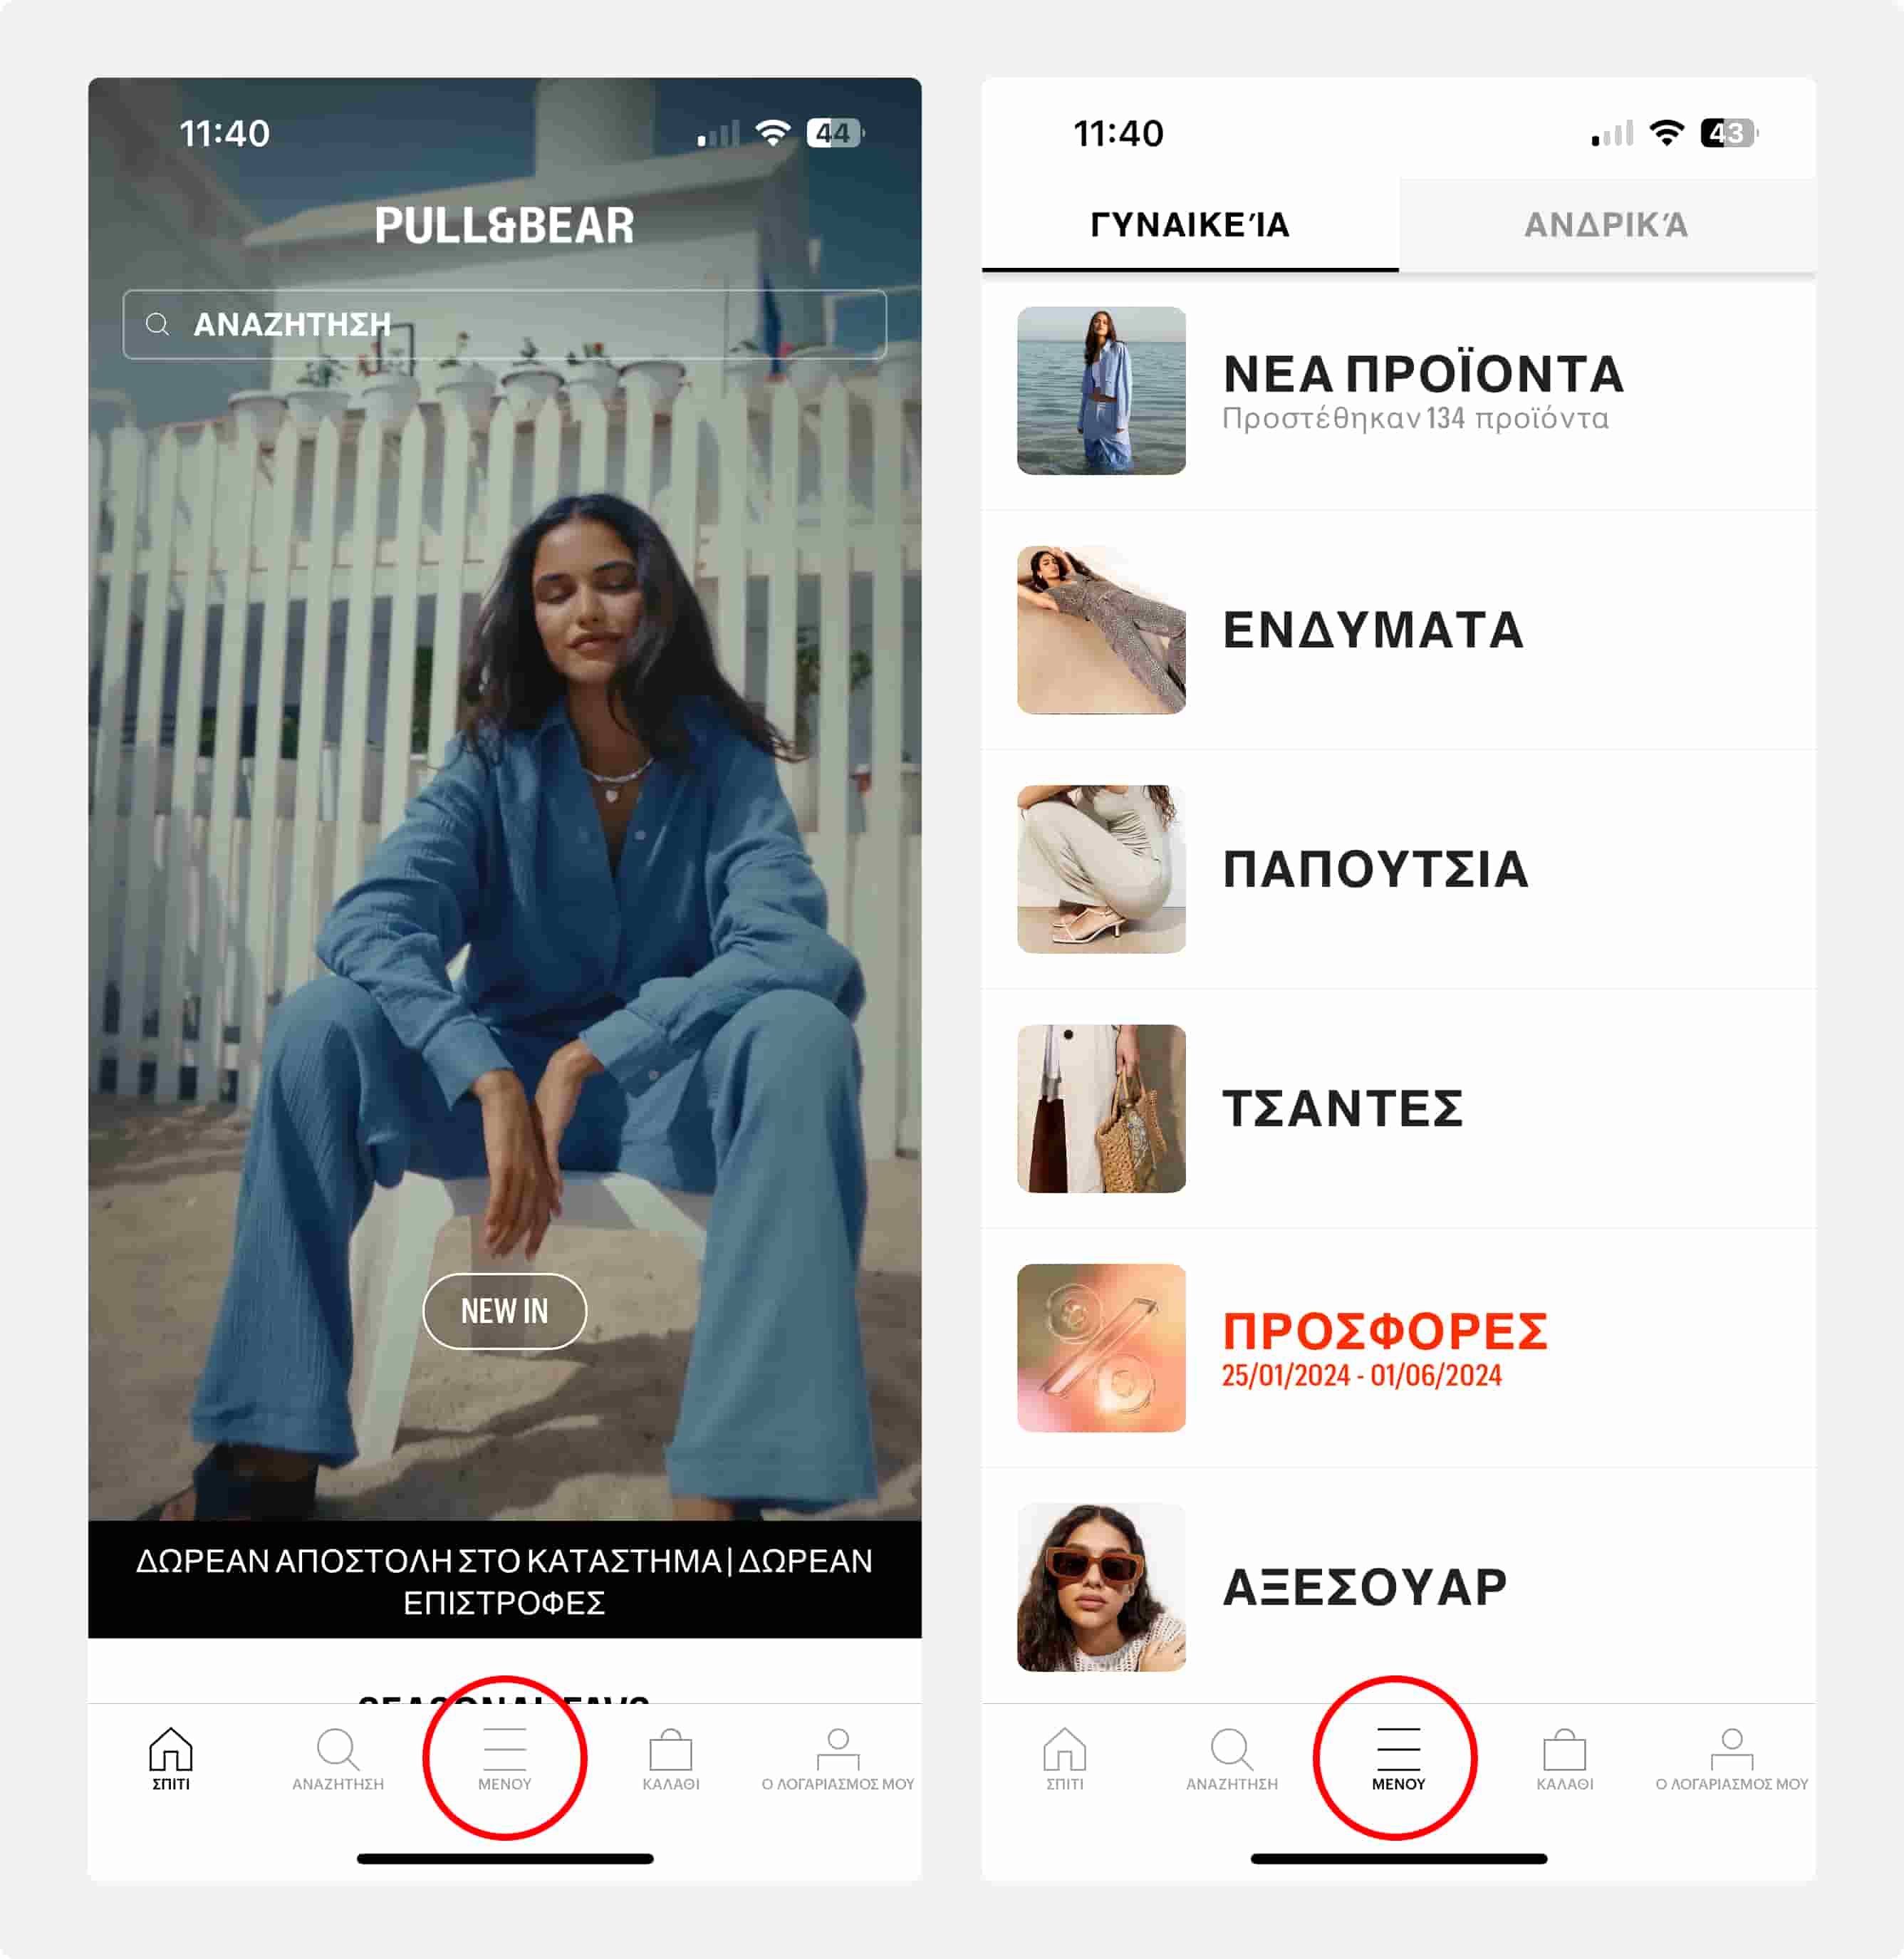 Reference image from the “Pull & Bear” mobile app